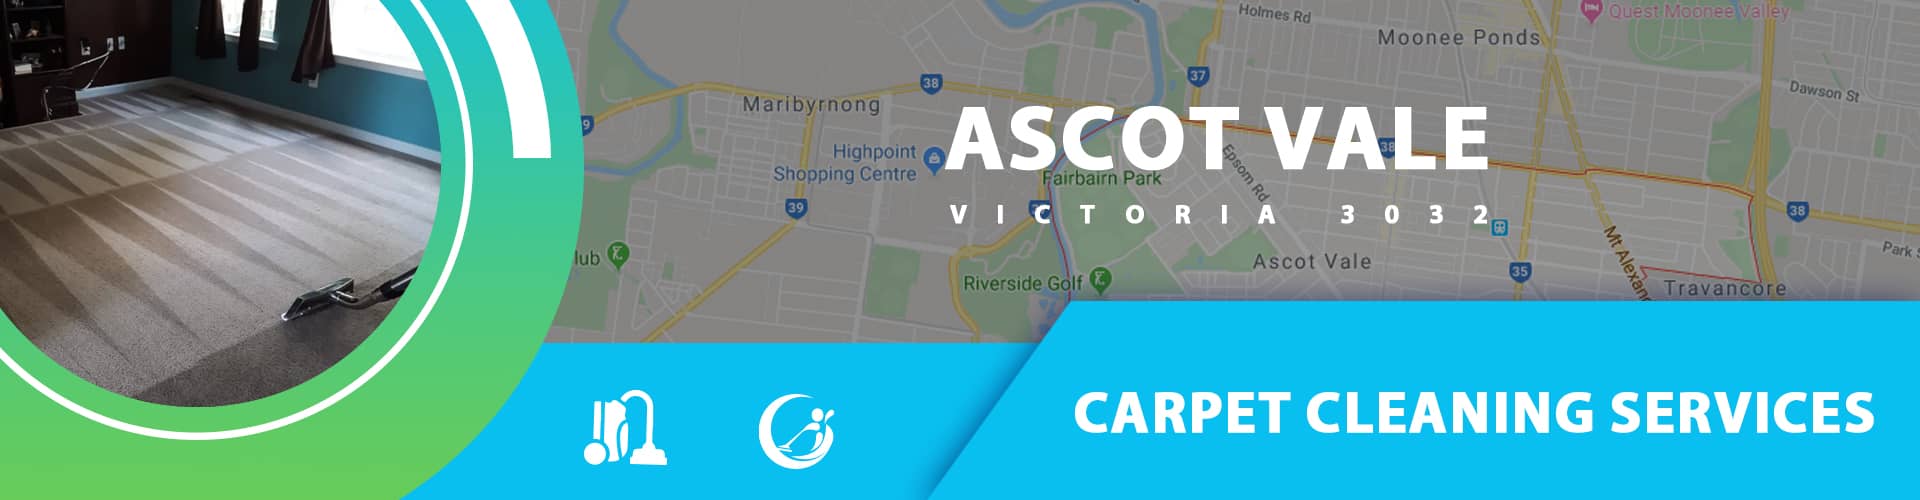 Carpet Cleaning Ascot Vale